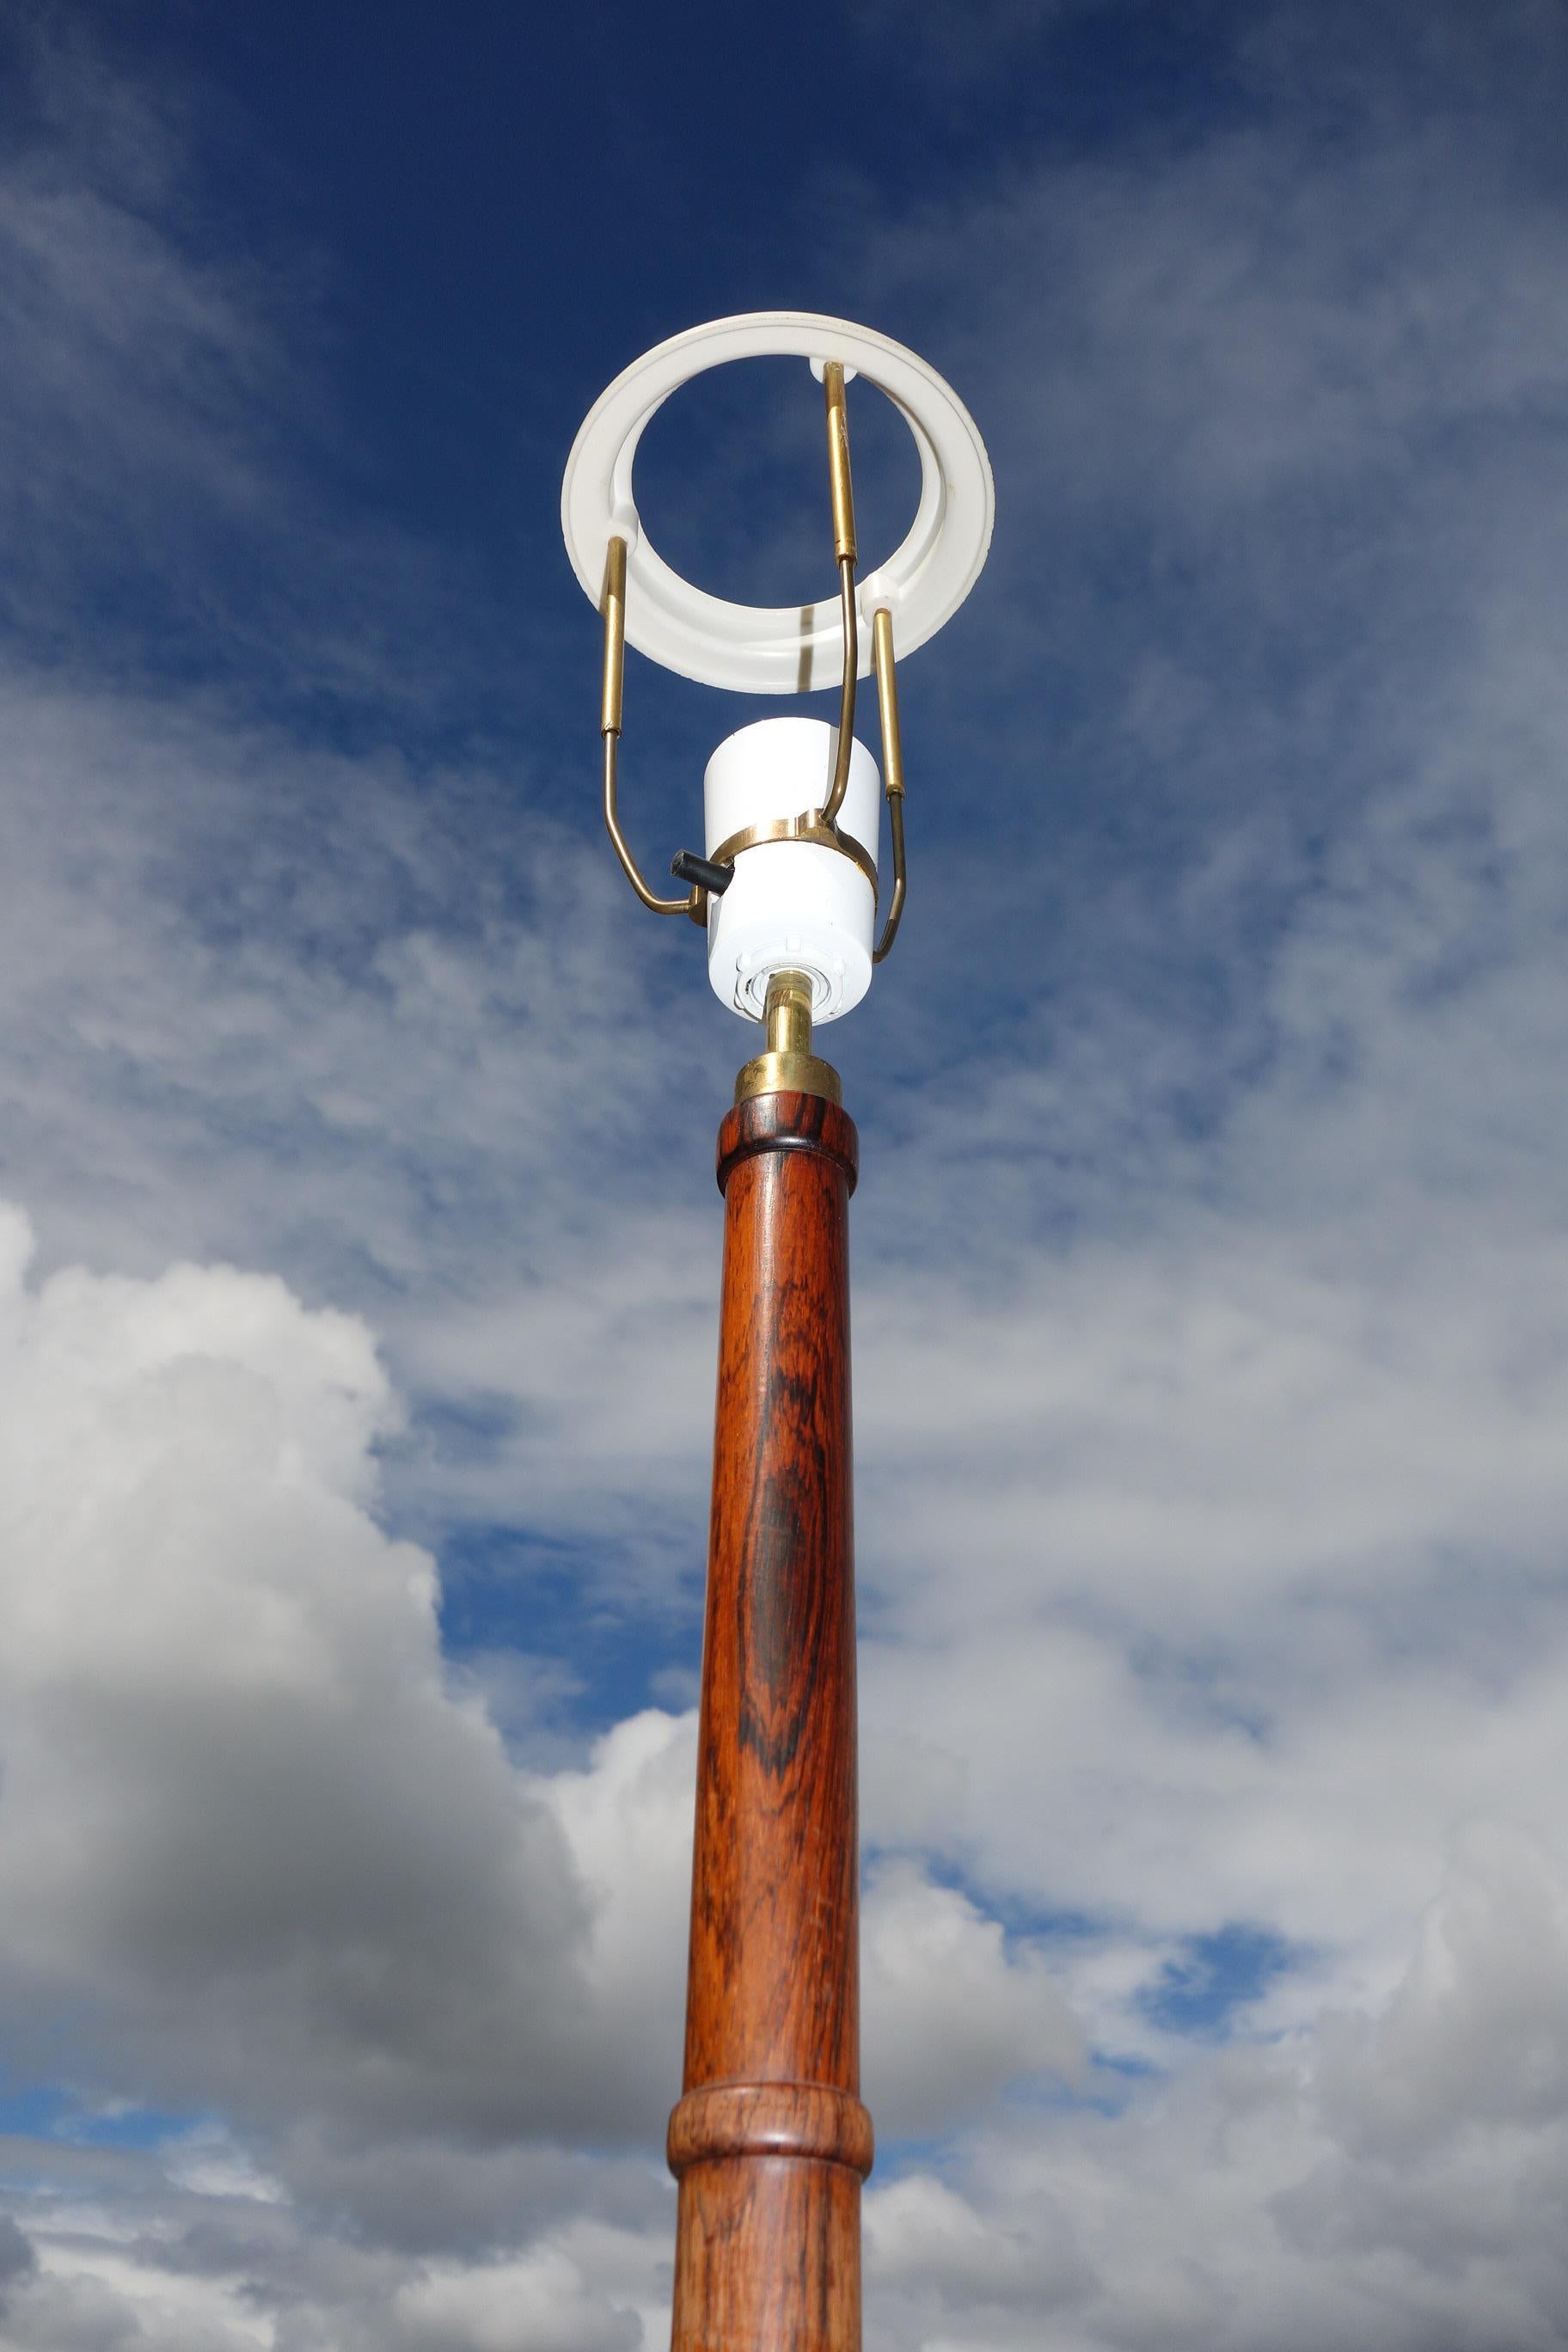 Scandinavian Modern Classic Danish Rosewood and Brass Adjustable Hight Floodlight from the 1960s For Sale